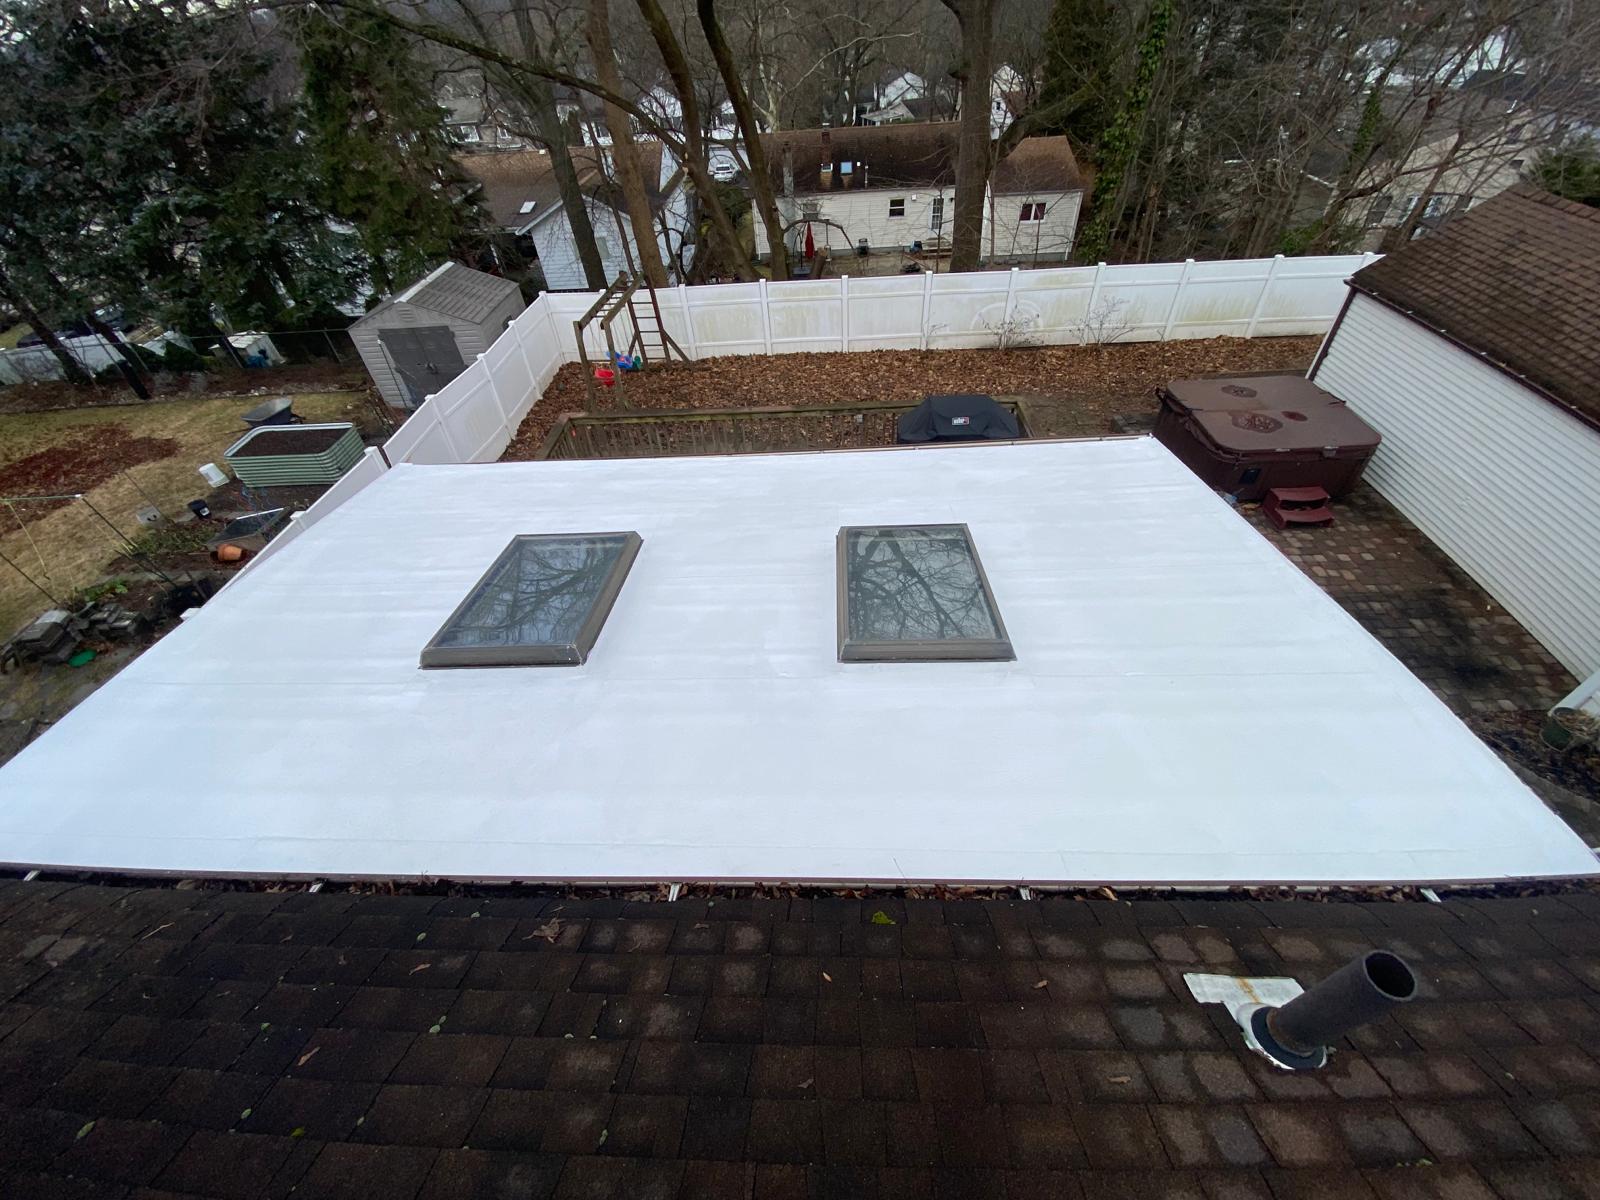 New Flat Roof Installation with Silicone Roof in Paramus NJ Project Shot 5